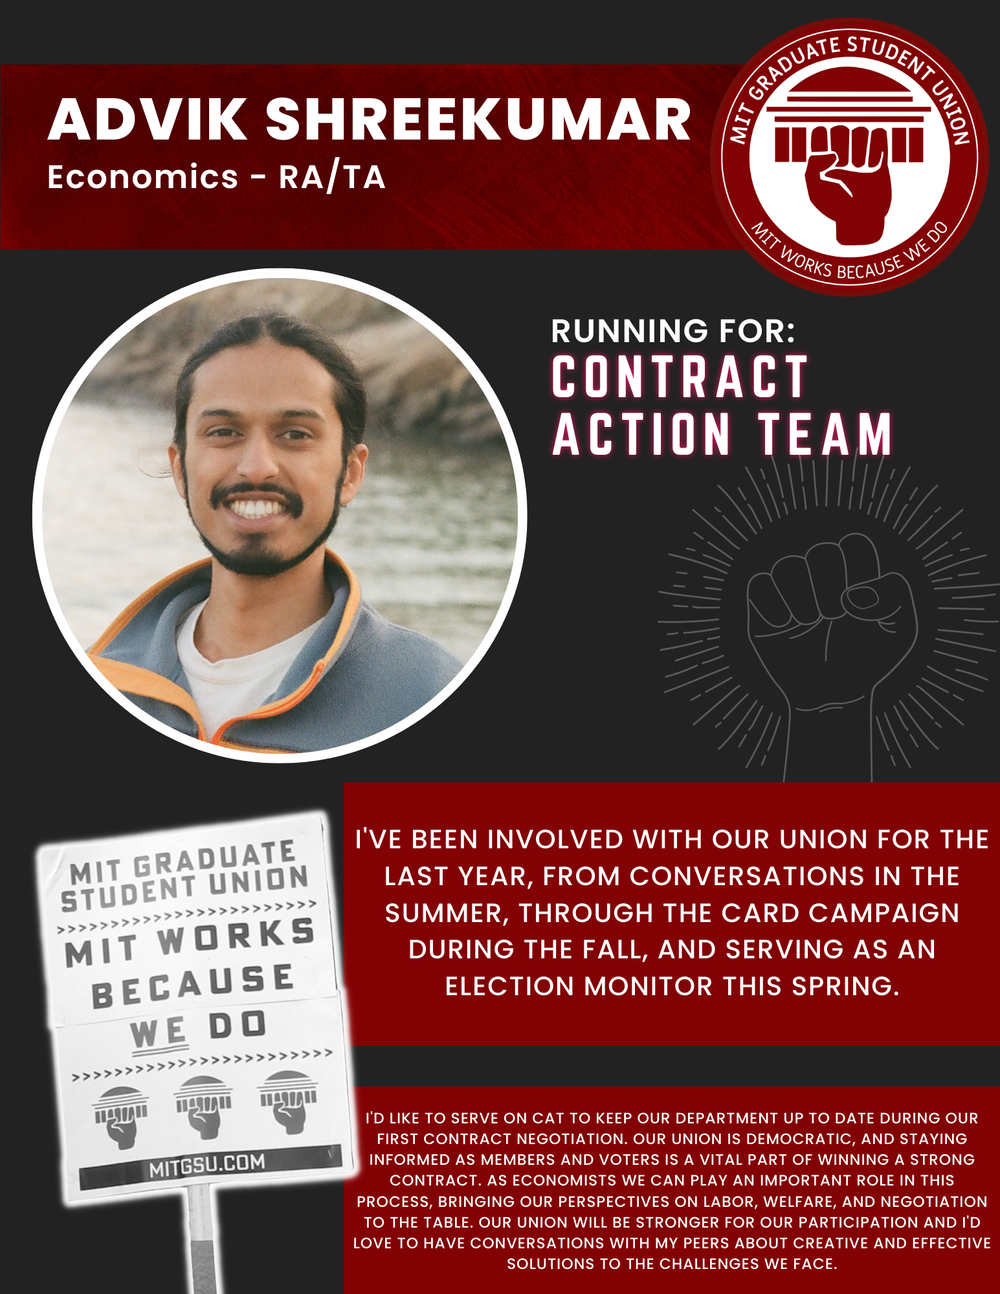  ADVIK SHREEKUMAR Economics - RA/TA   RUNNING FOR: Contract Action Team  I'VE BEEN INVOLVED WITH OUR UNION FOR THE LAST YEAR, FROM CONVERSATIONS IN THE SUMMER, THROUGH THE CARD CAMPAIGN DURING THE FALL, AND SERVING AS AN ELECTION MONITOR THIS SPRING.